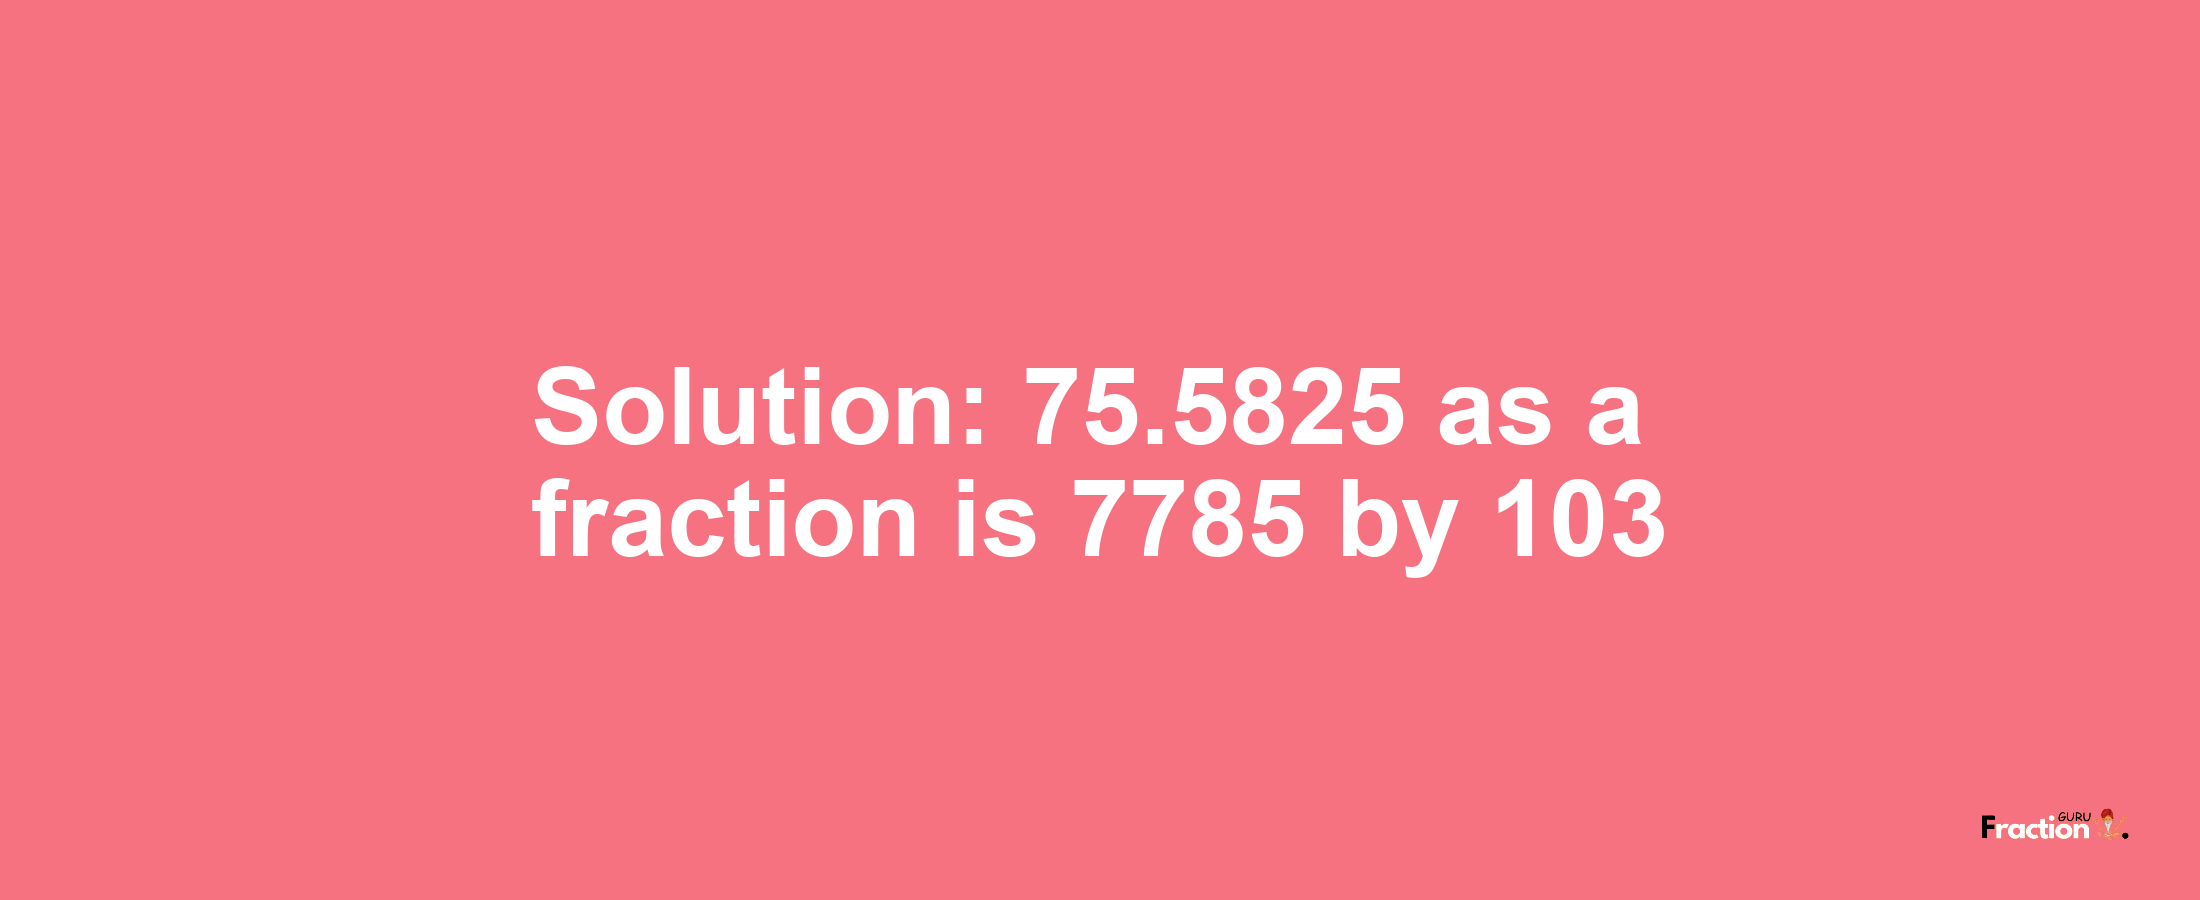 Solution:75.5825 as a fraction is 7785/103